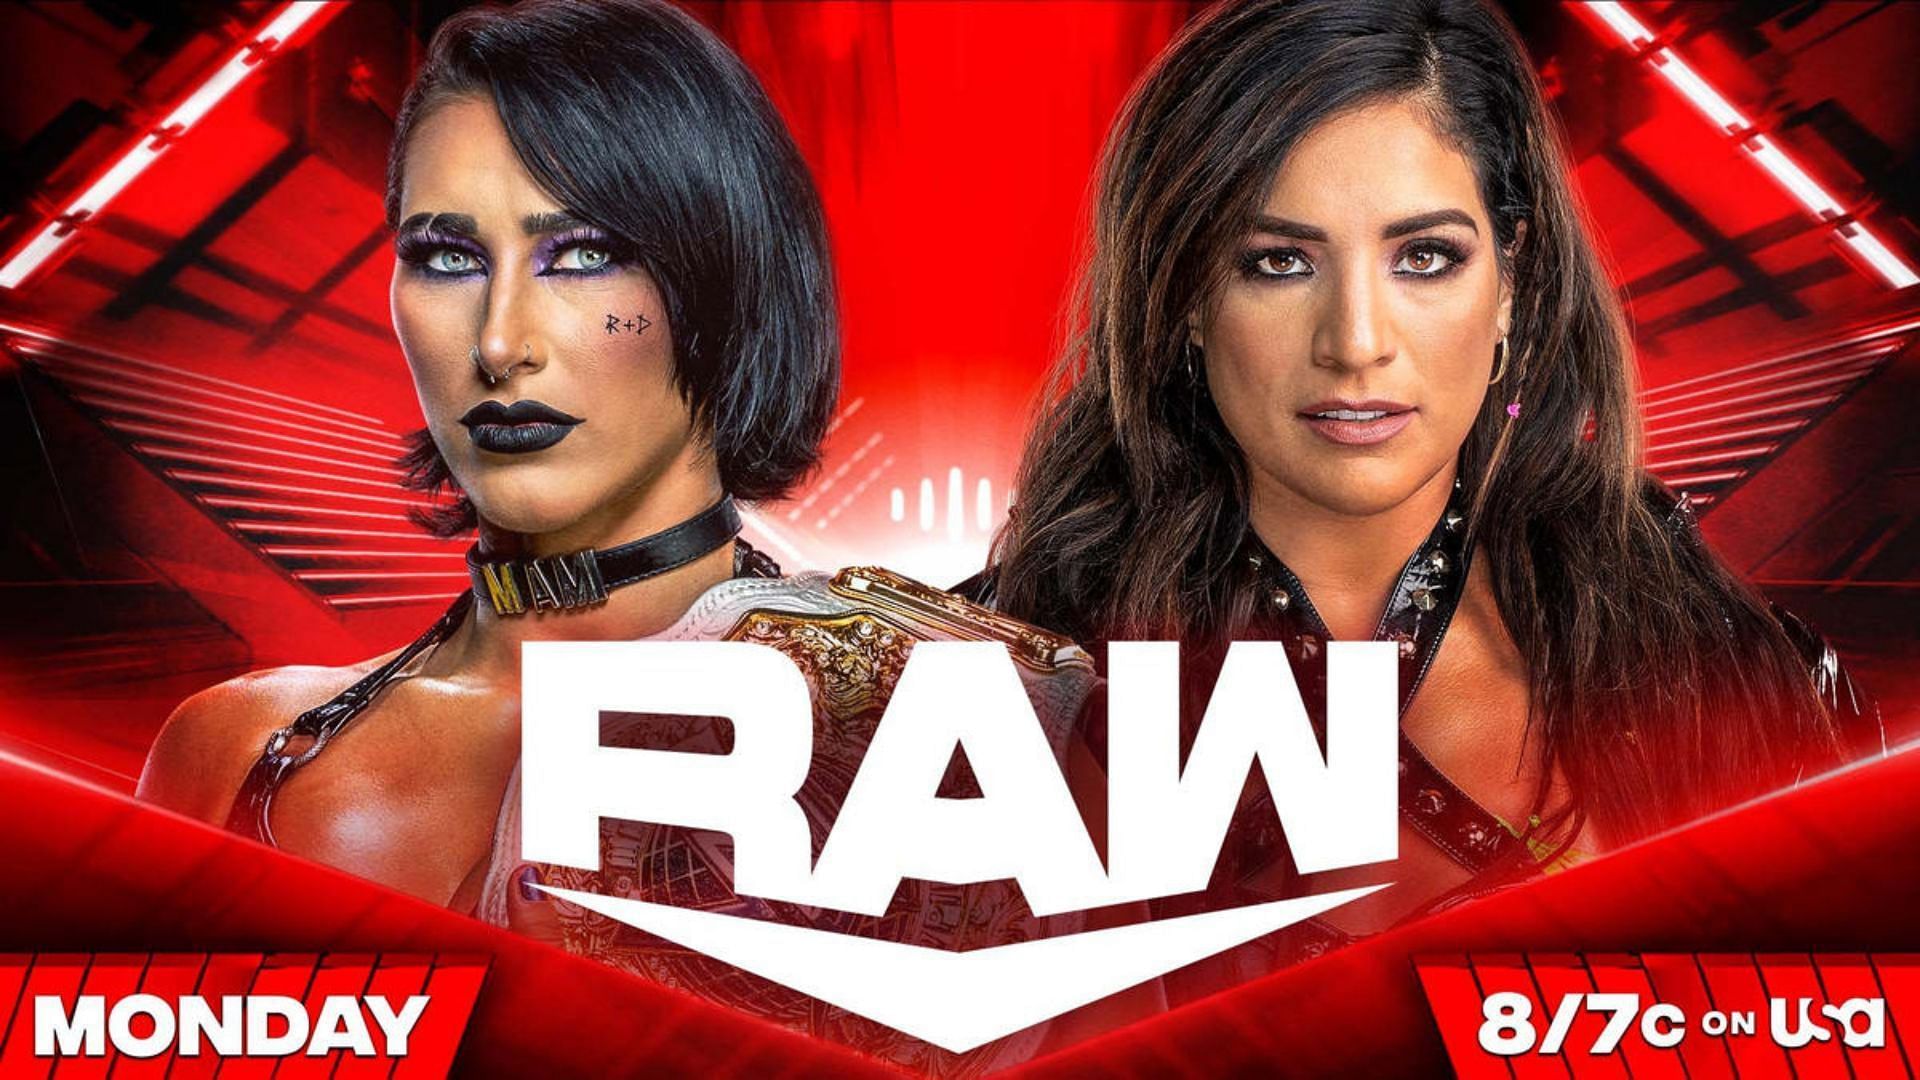 Rhea defends her title next week in a rematch from Payback